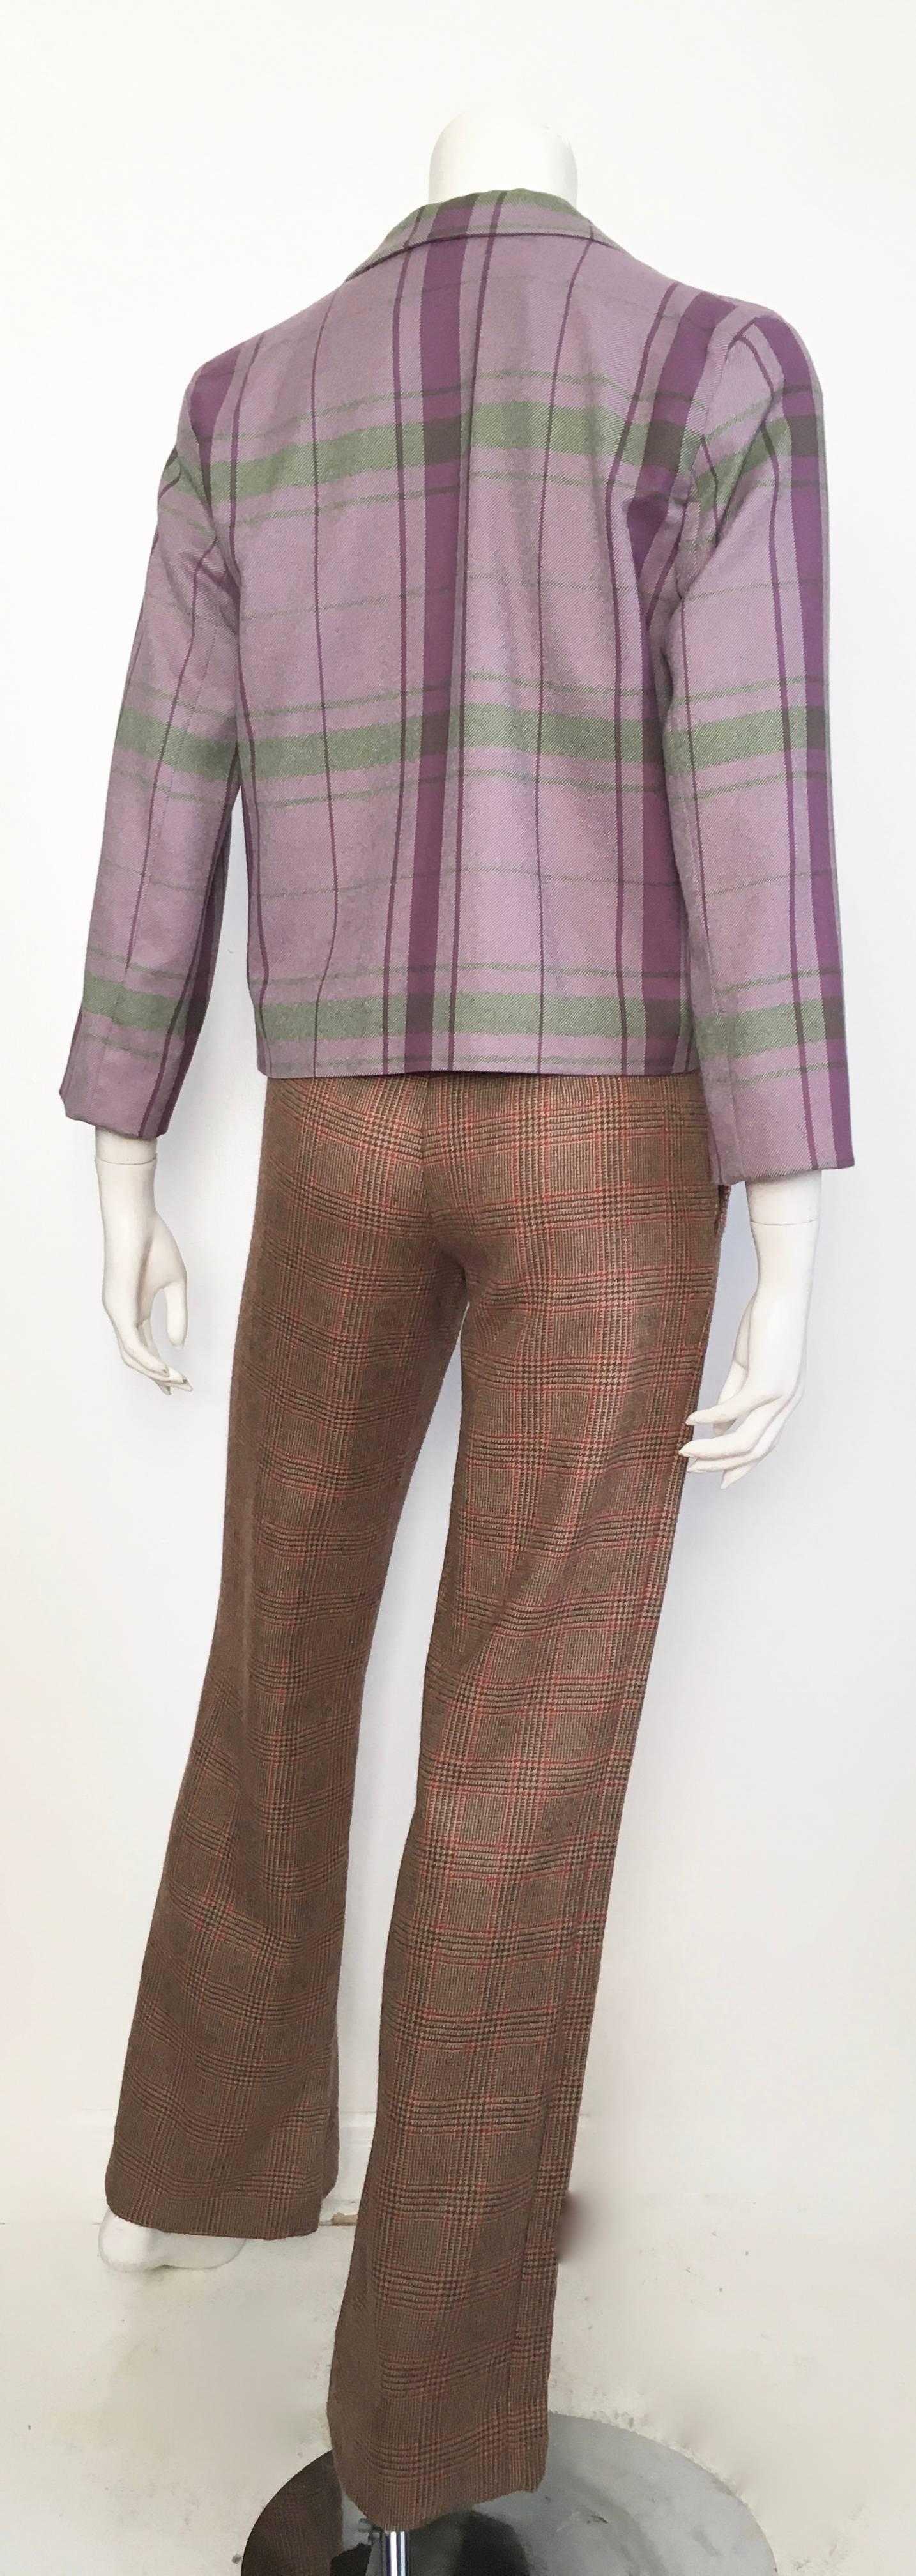 Blumarine Glen Plaid Wool Pants with Pockets, Size 4  For Sale 4